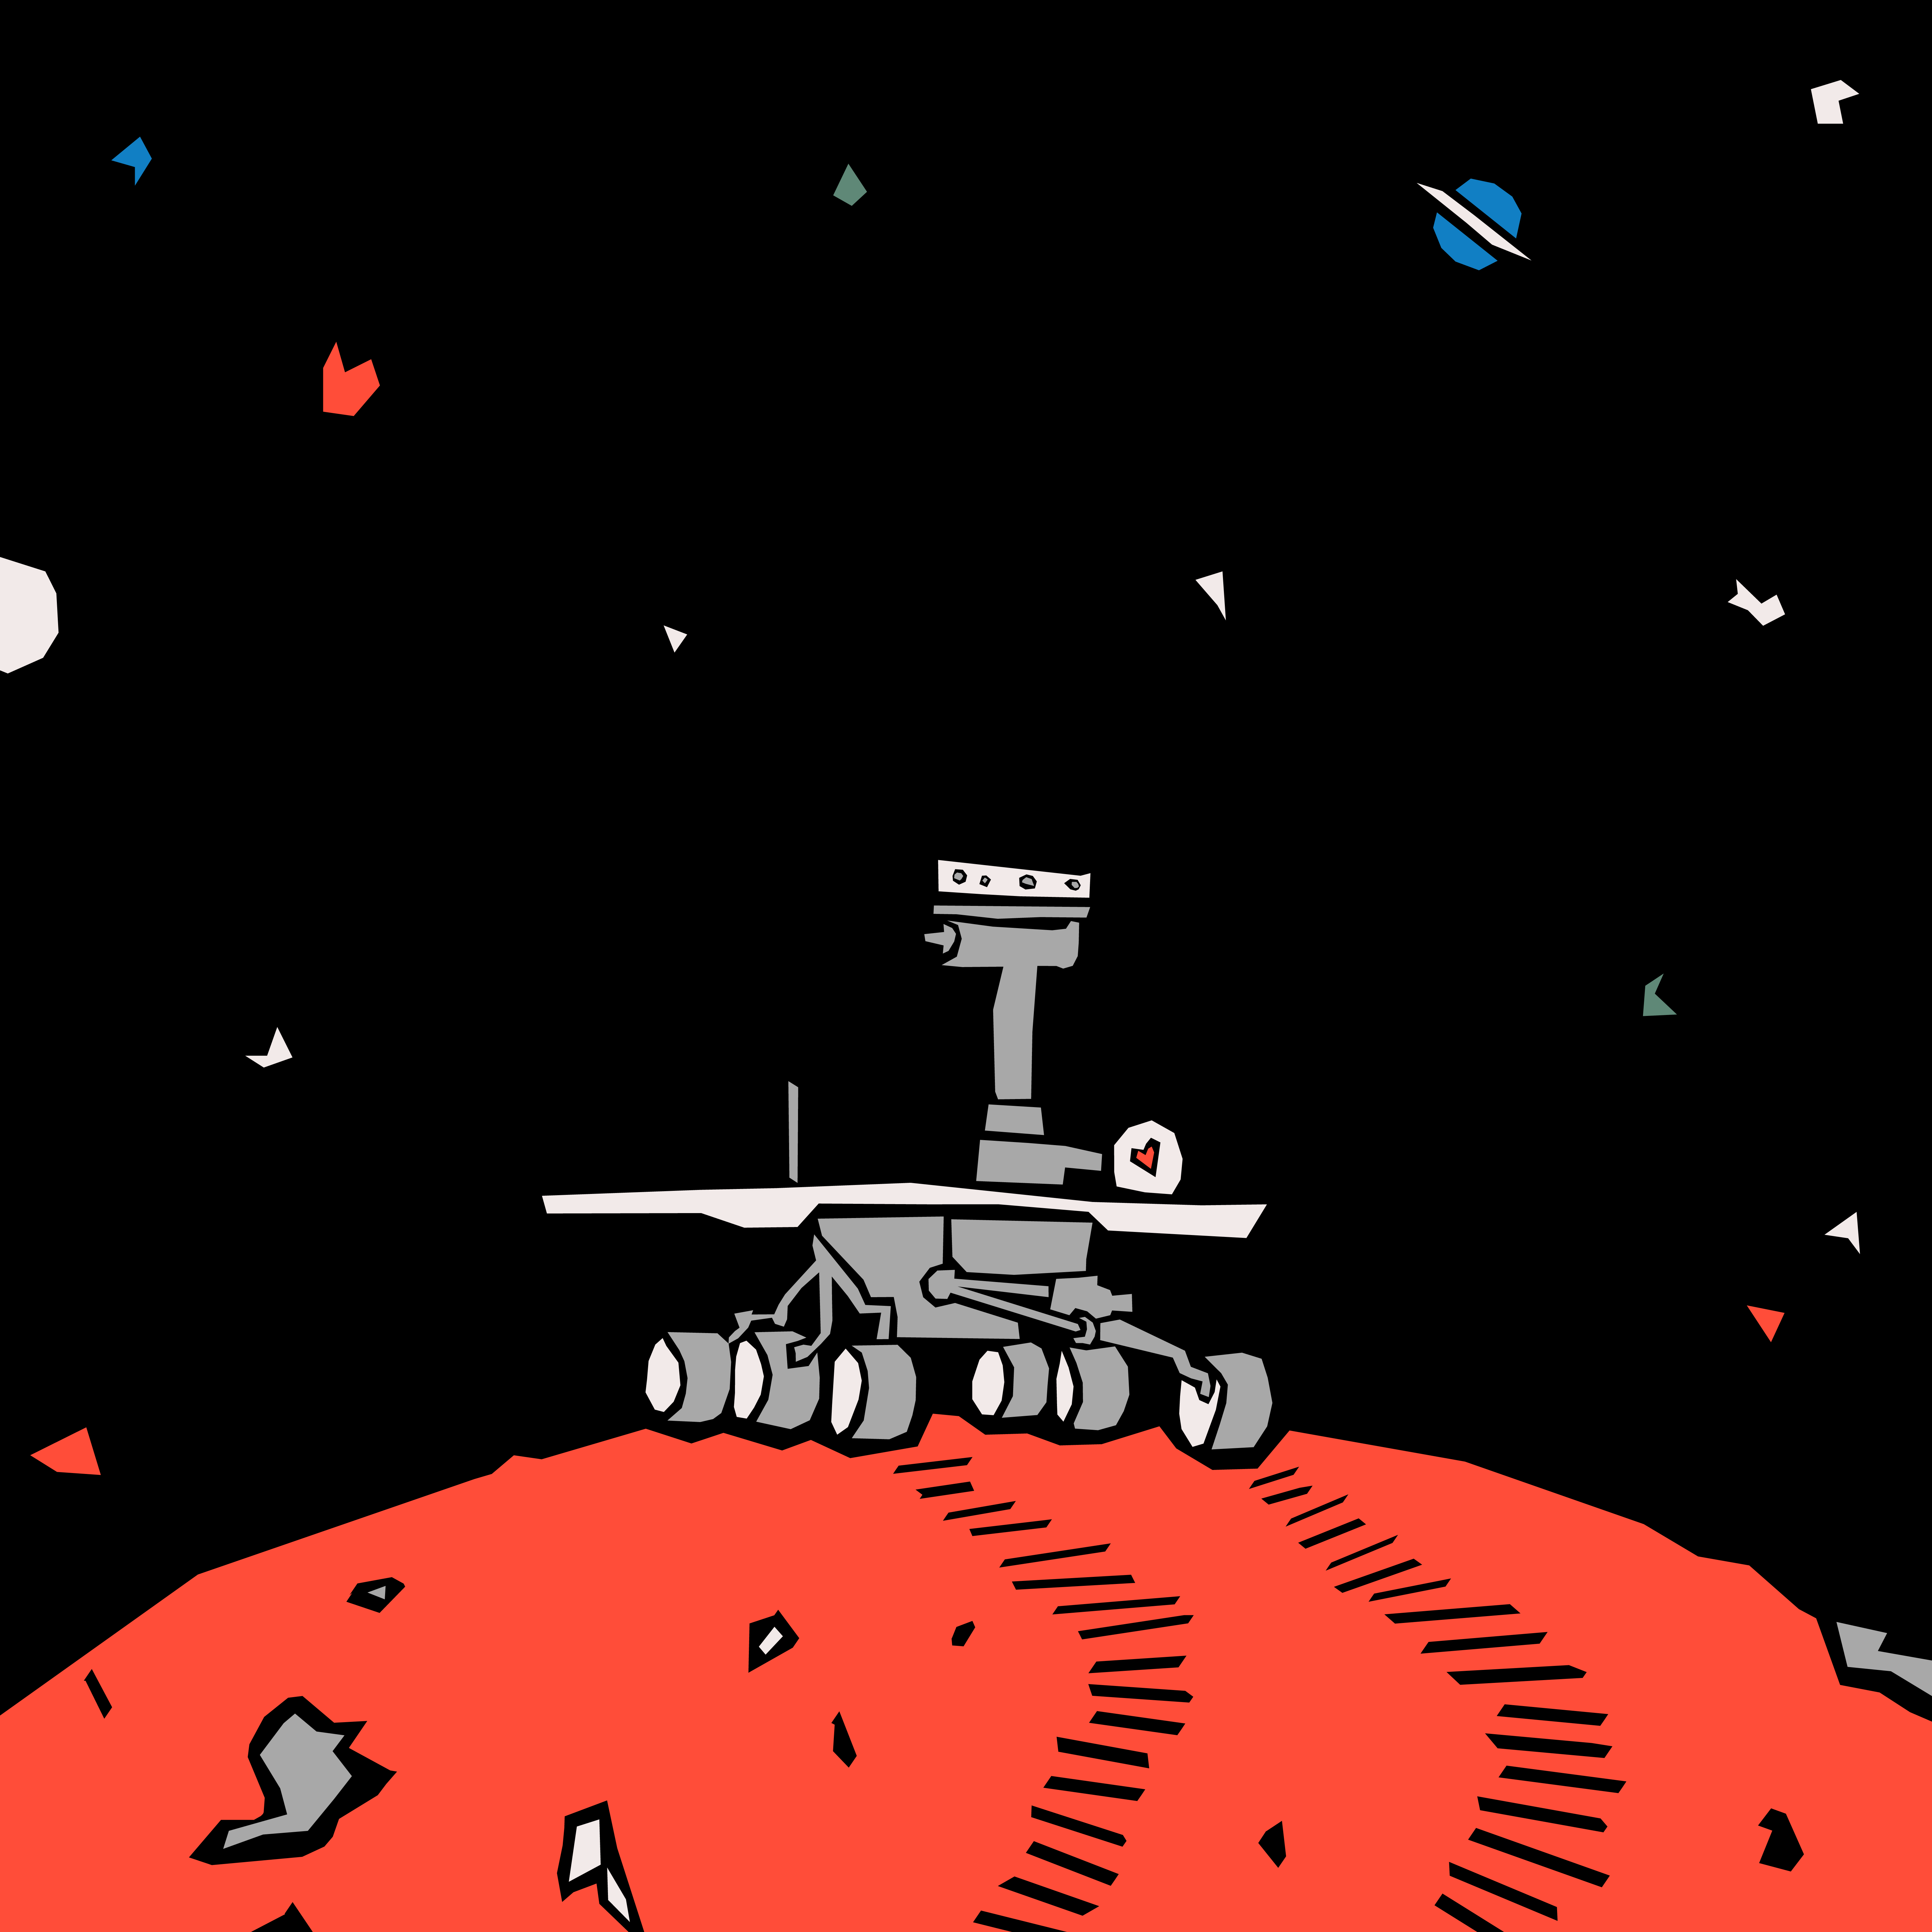 Illustration of a gray Mars rover sitting on a curved red planet, track marks and craters on the planet’s surface. The rover has six wheels, a long flat back of solar panels, and a long neck carrying a rectangular shaped bank of cameras. A small red heart appears on the body of the rover. The sky is black and peppered with geometric shapes – including stars and a ringed planet.